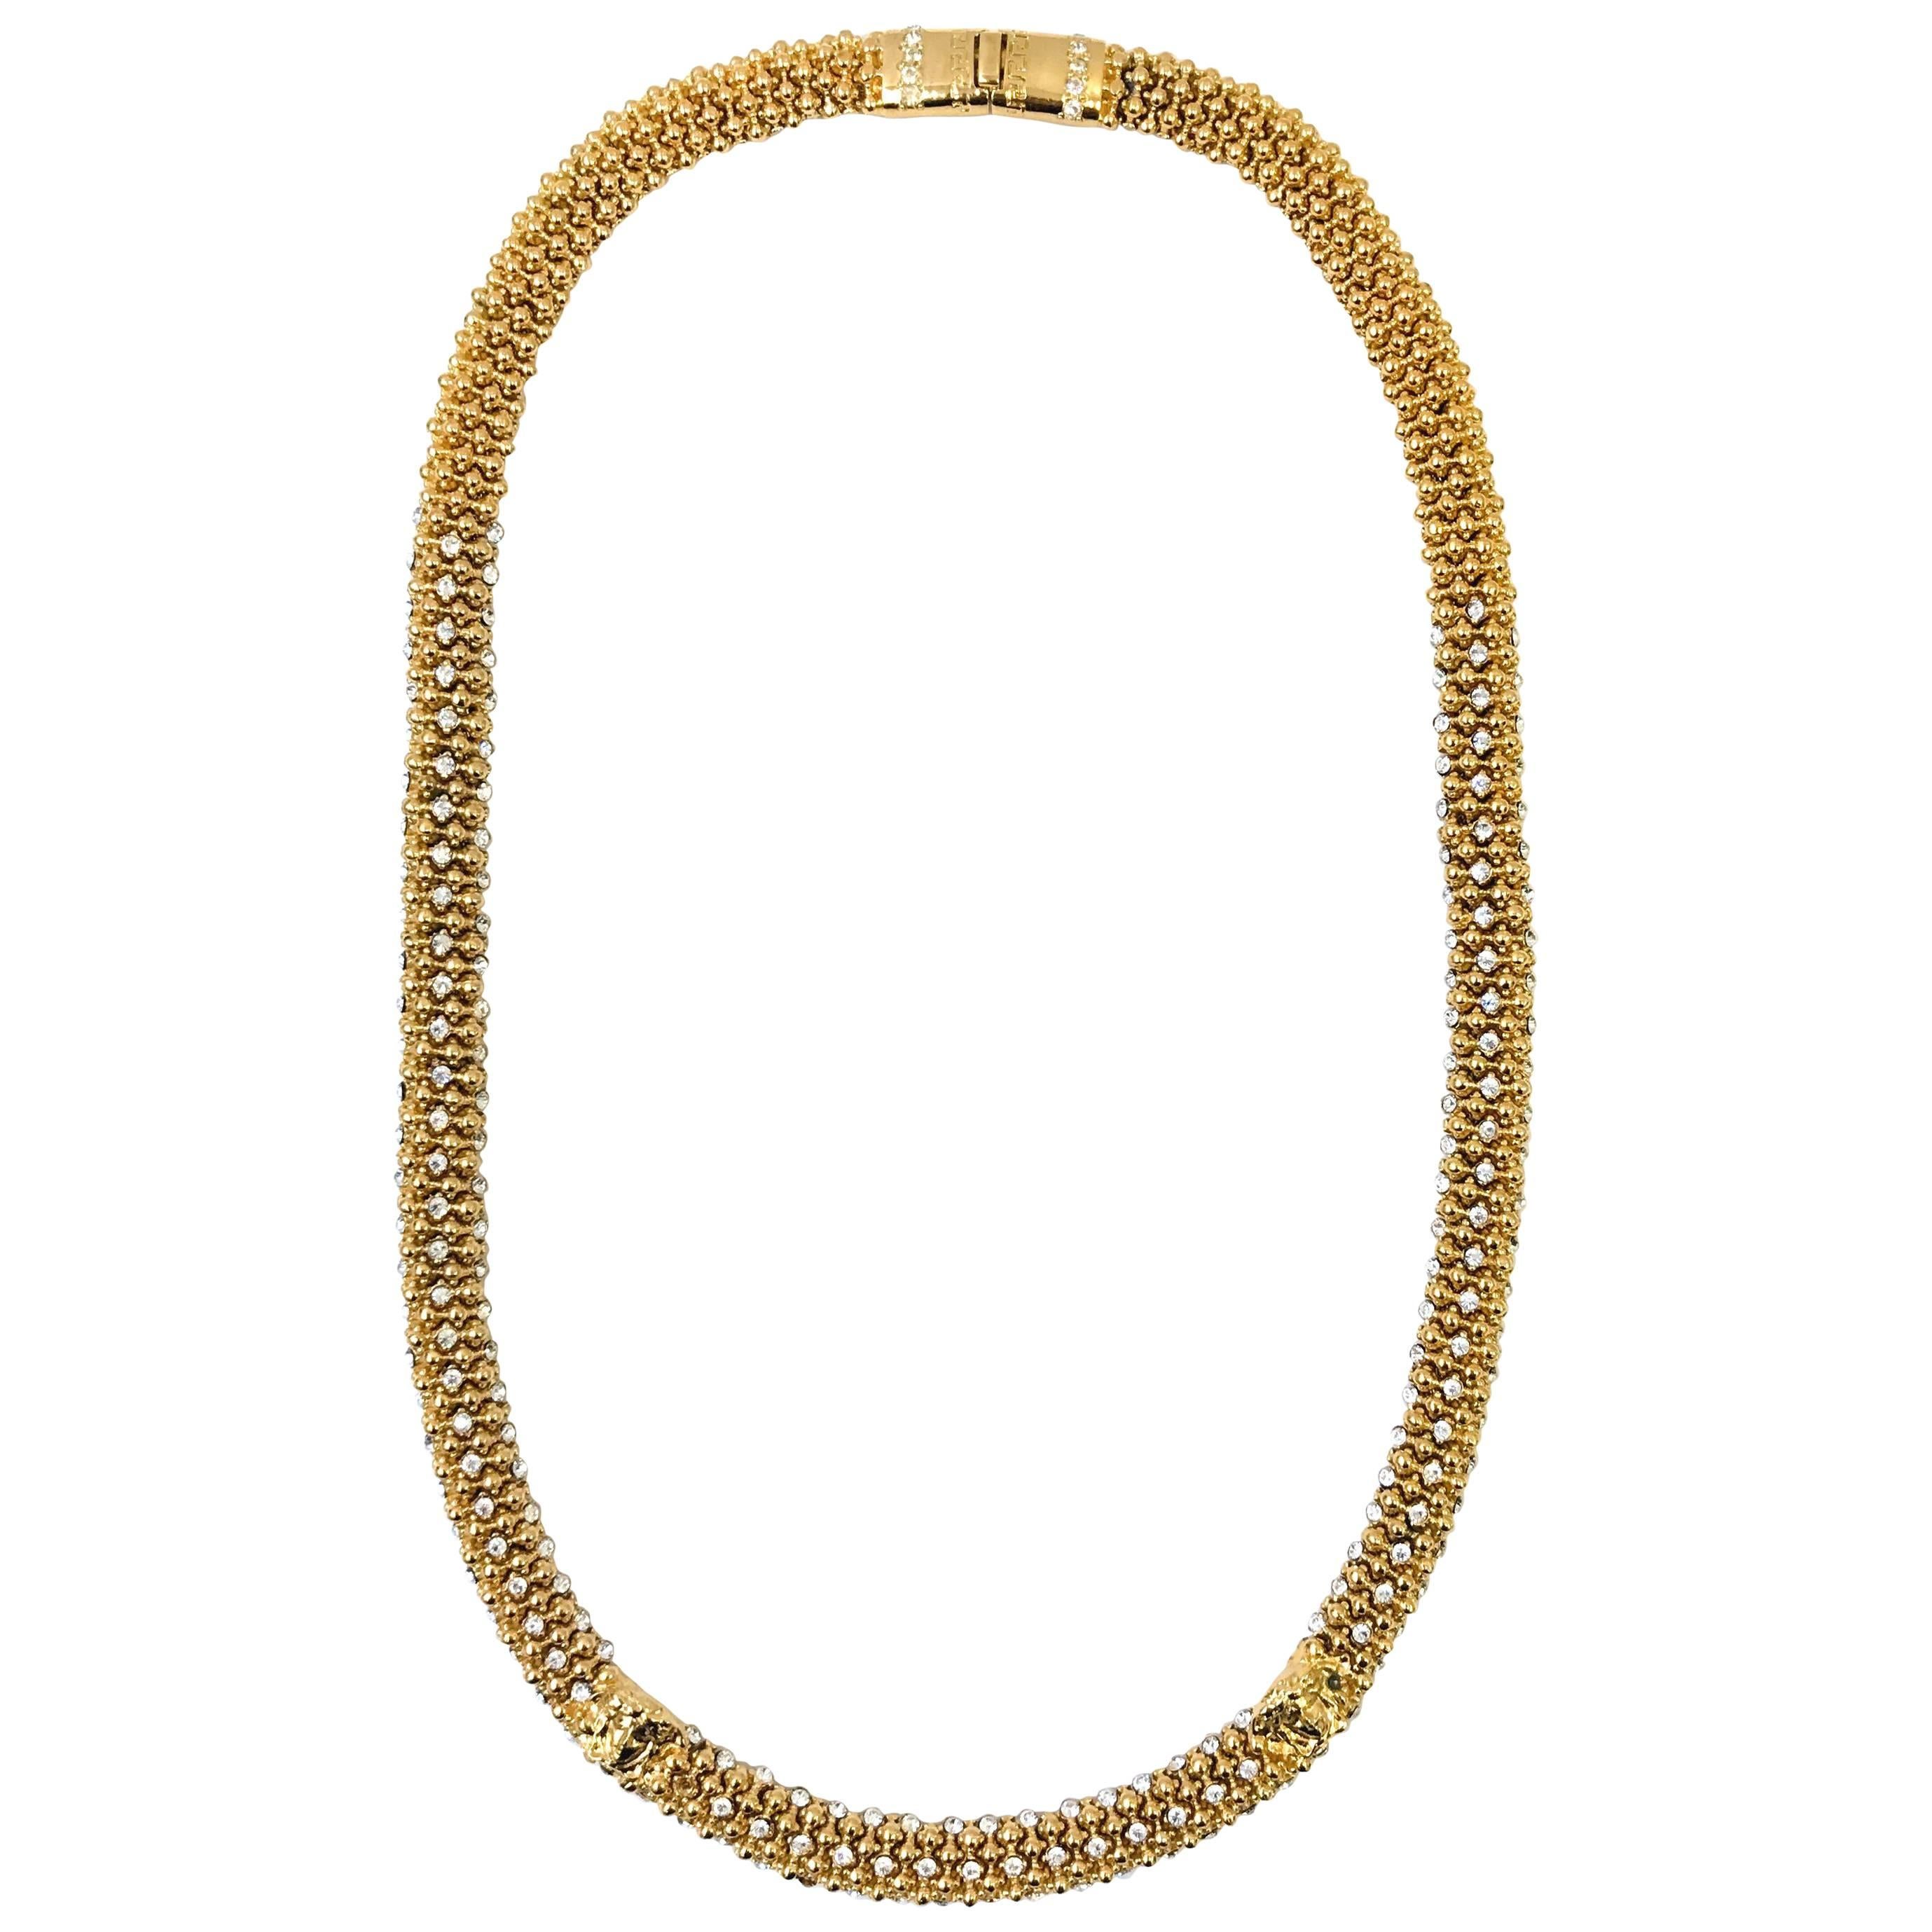 Gianni Versace 1990s gold tone matinee necklace For Sale